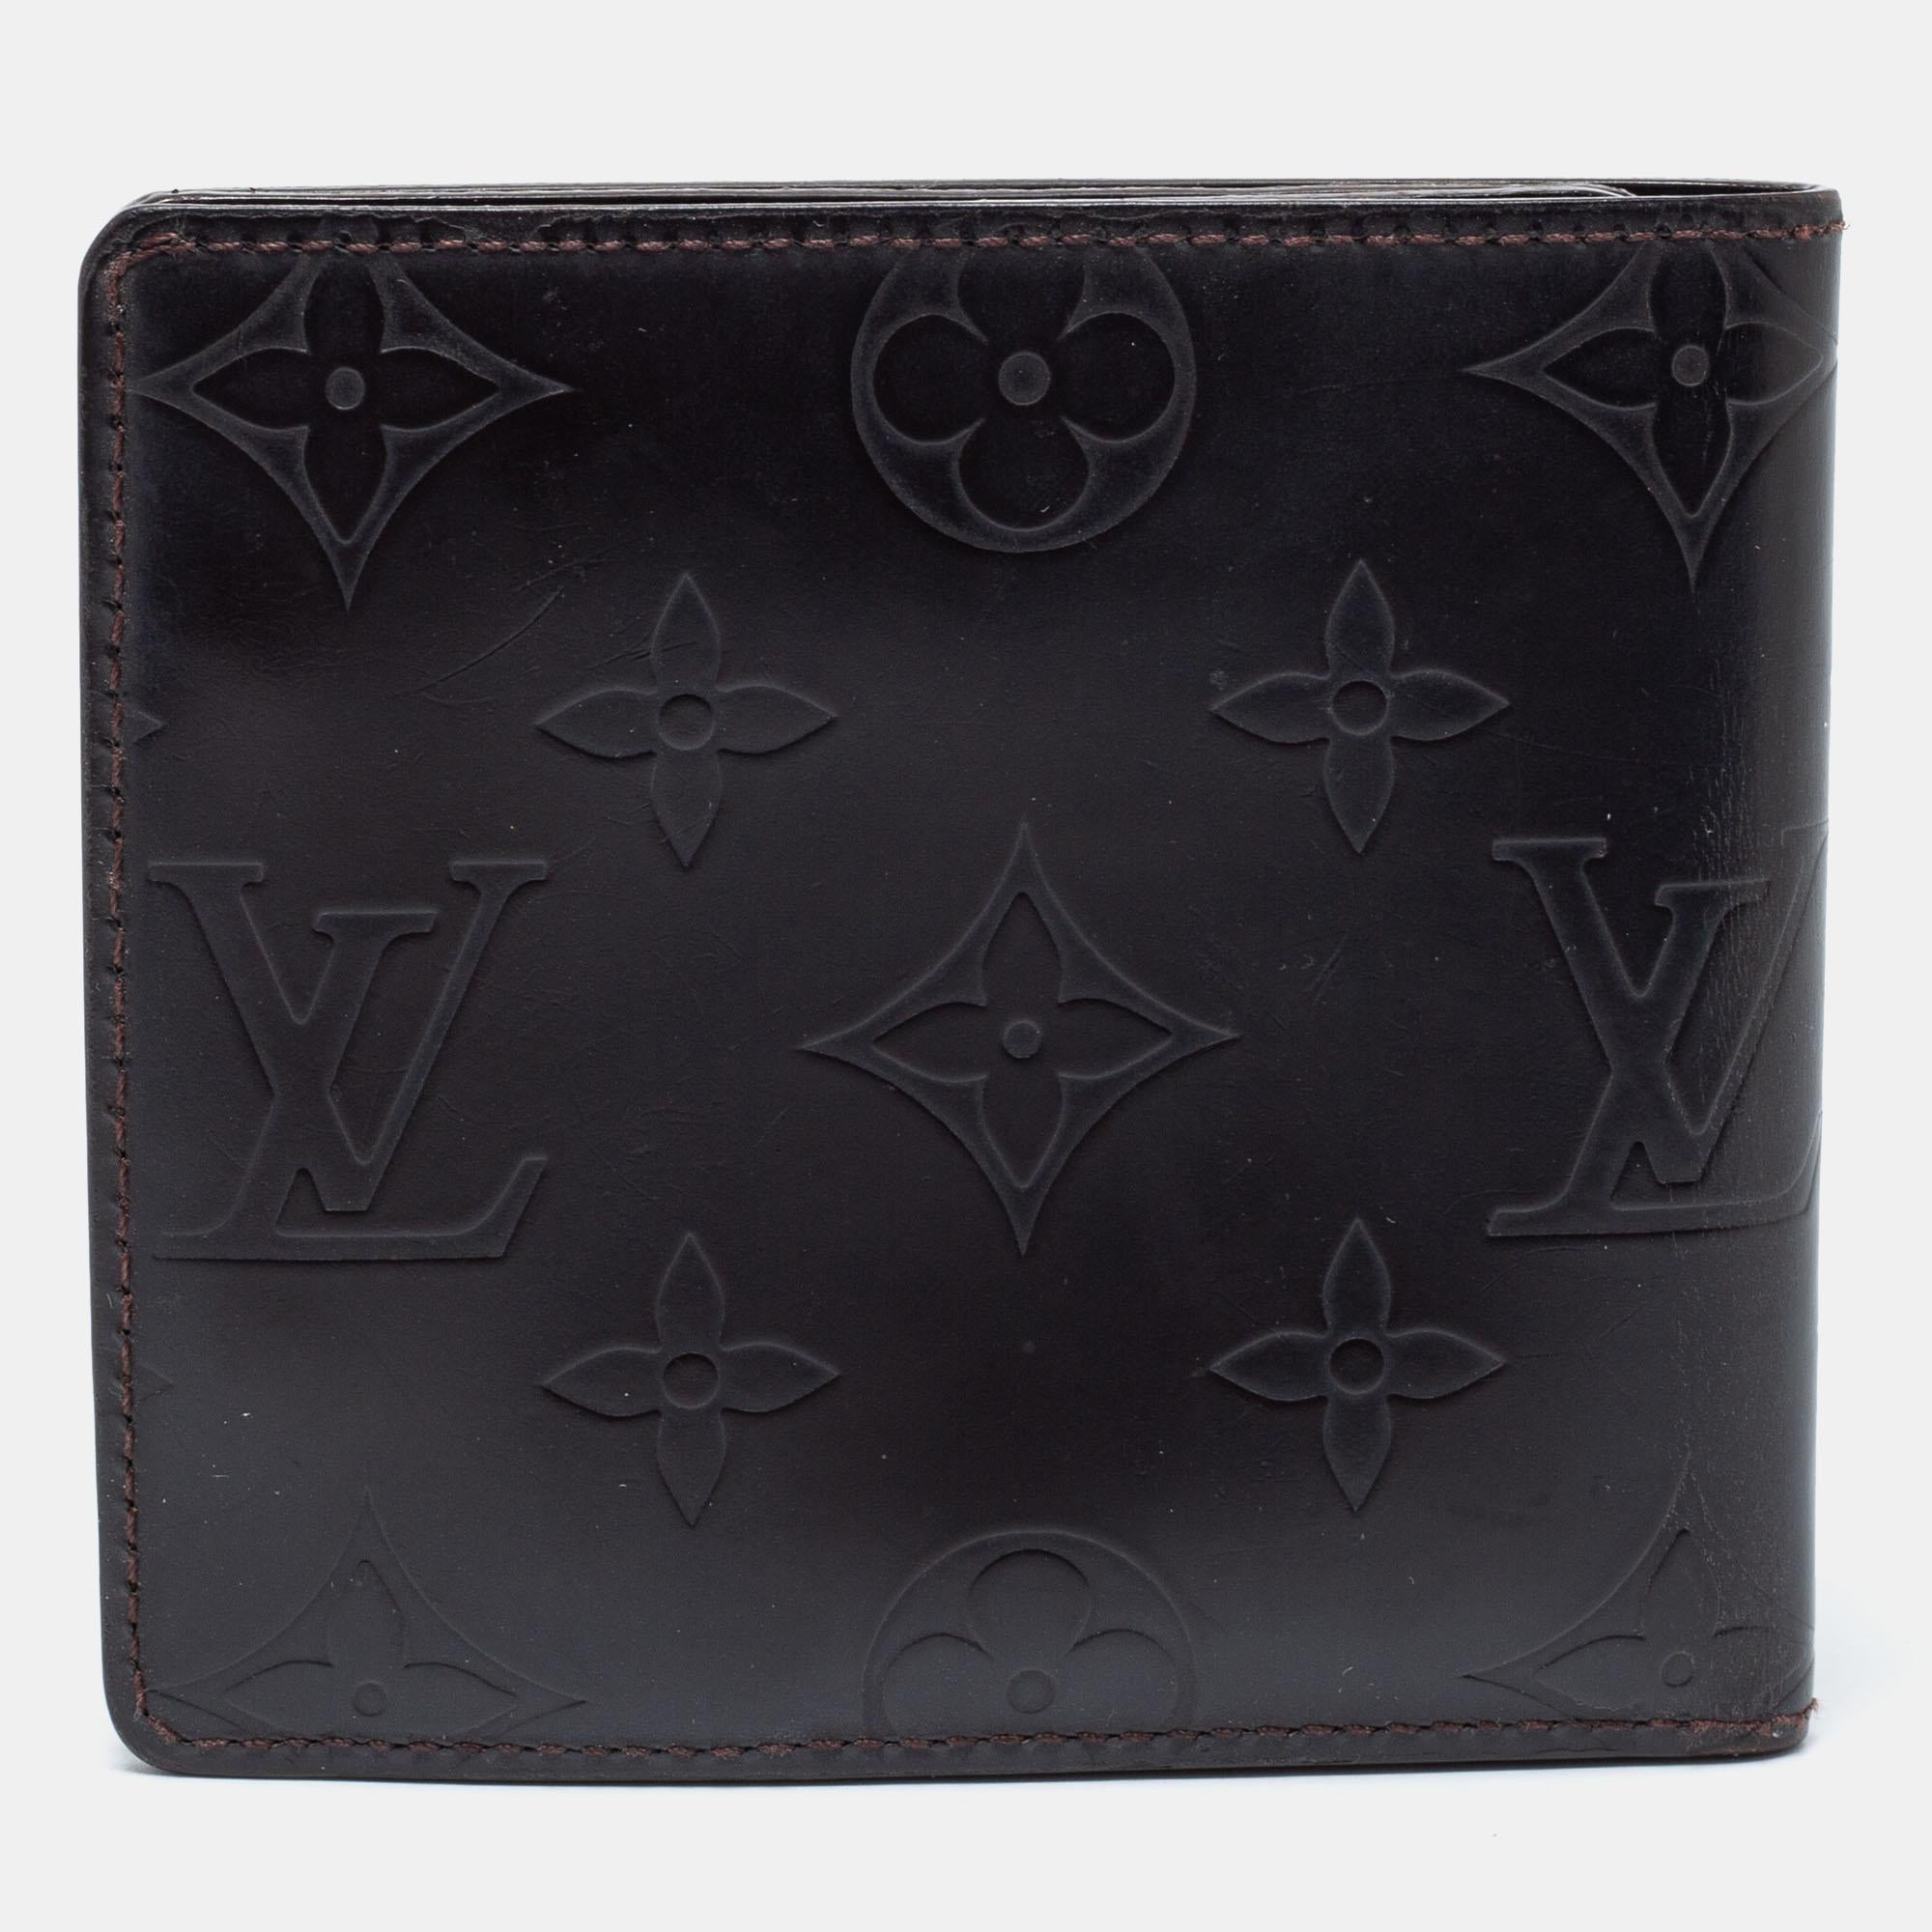 Embody the very definition of sophistication and class with this bifold wallet from Louis Vuitton. The body of the wallet is made from dark brown leather that is monogram-embossed. It has silver-tone accents and is finished with a compartmentalized